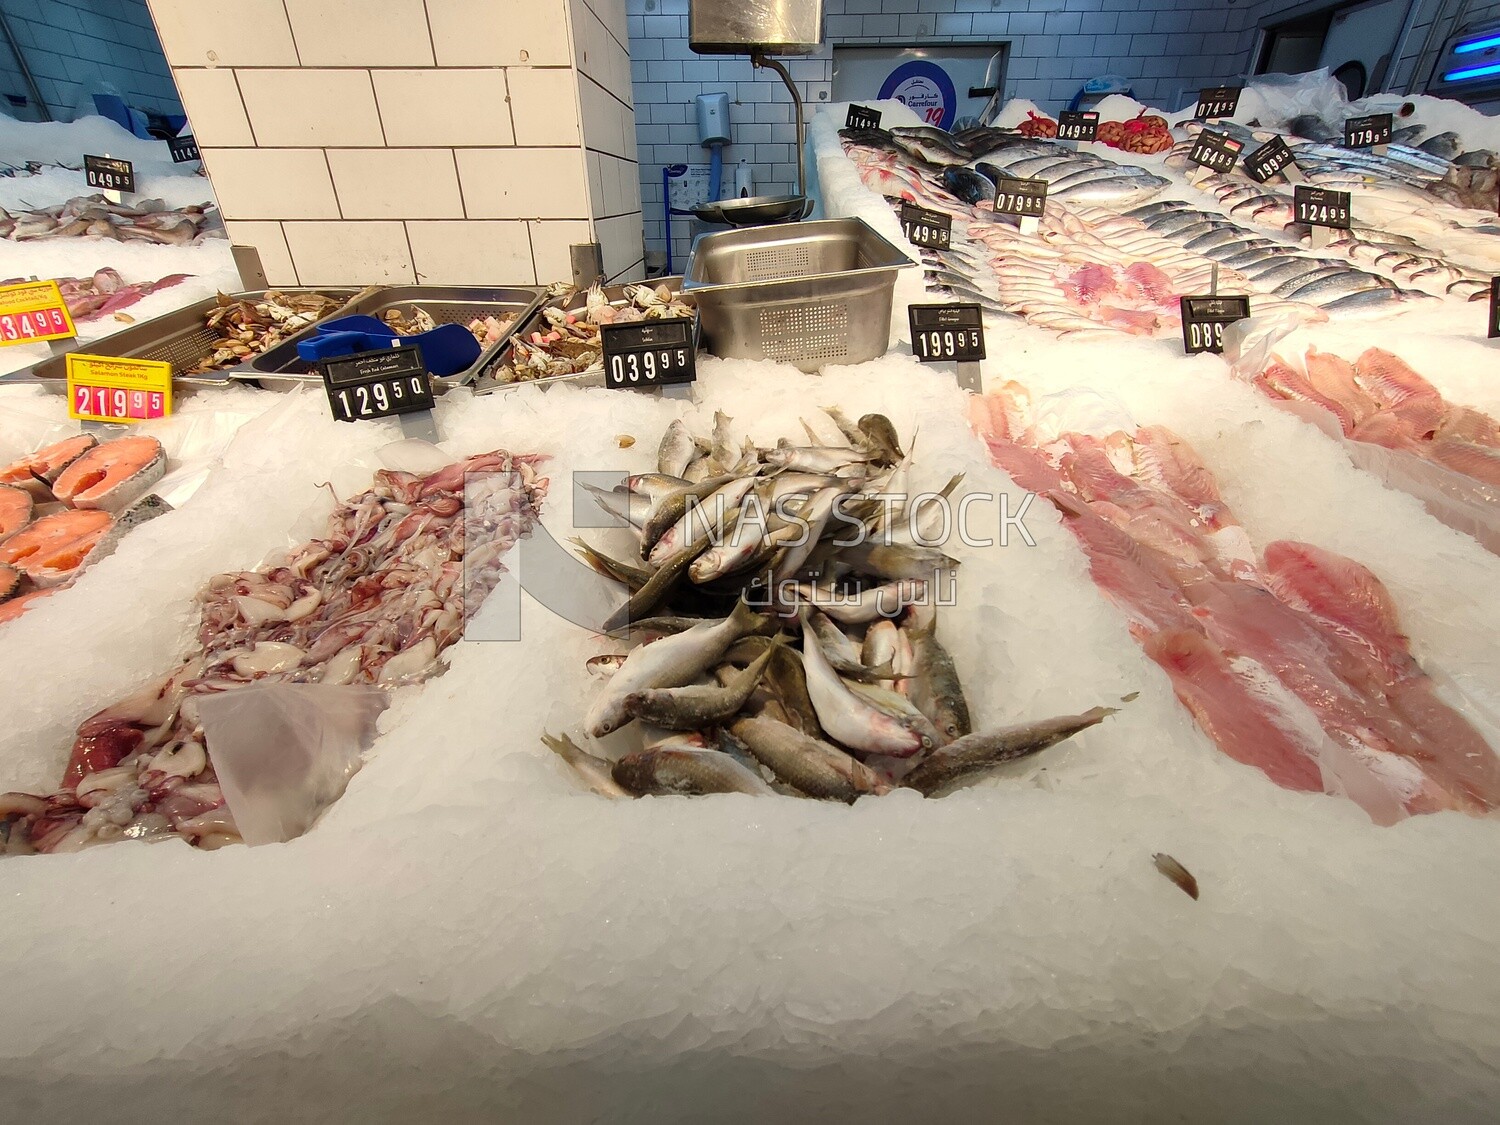 Fish section